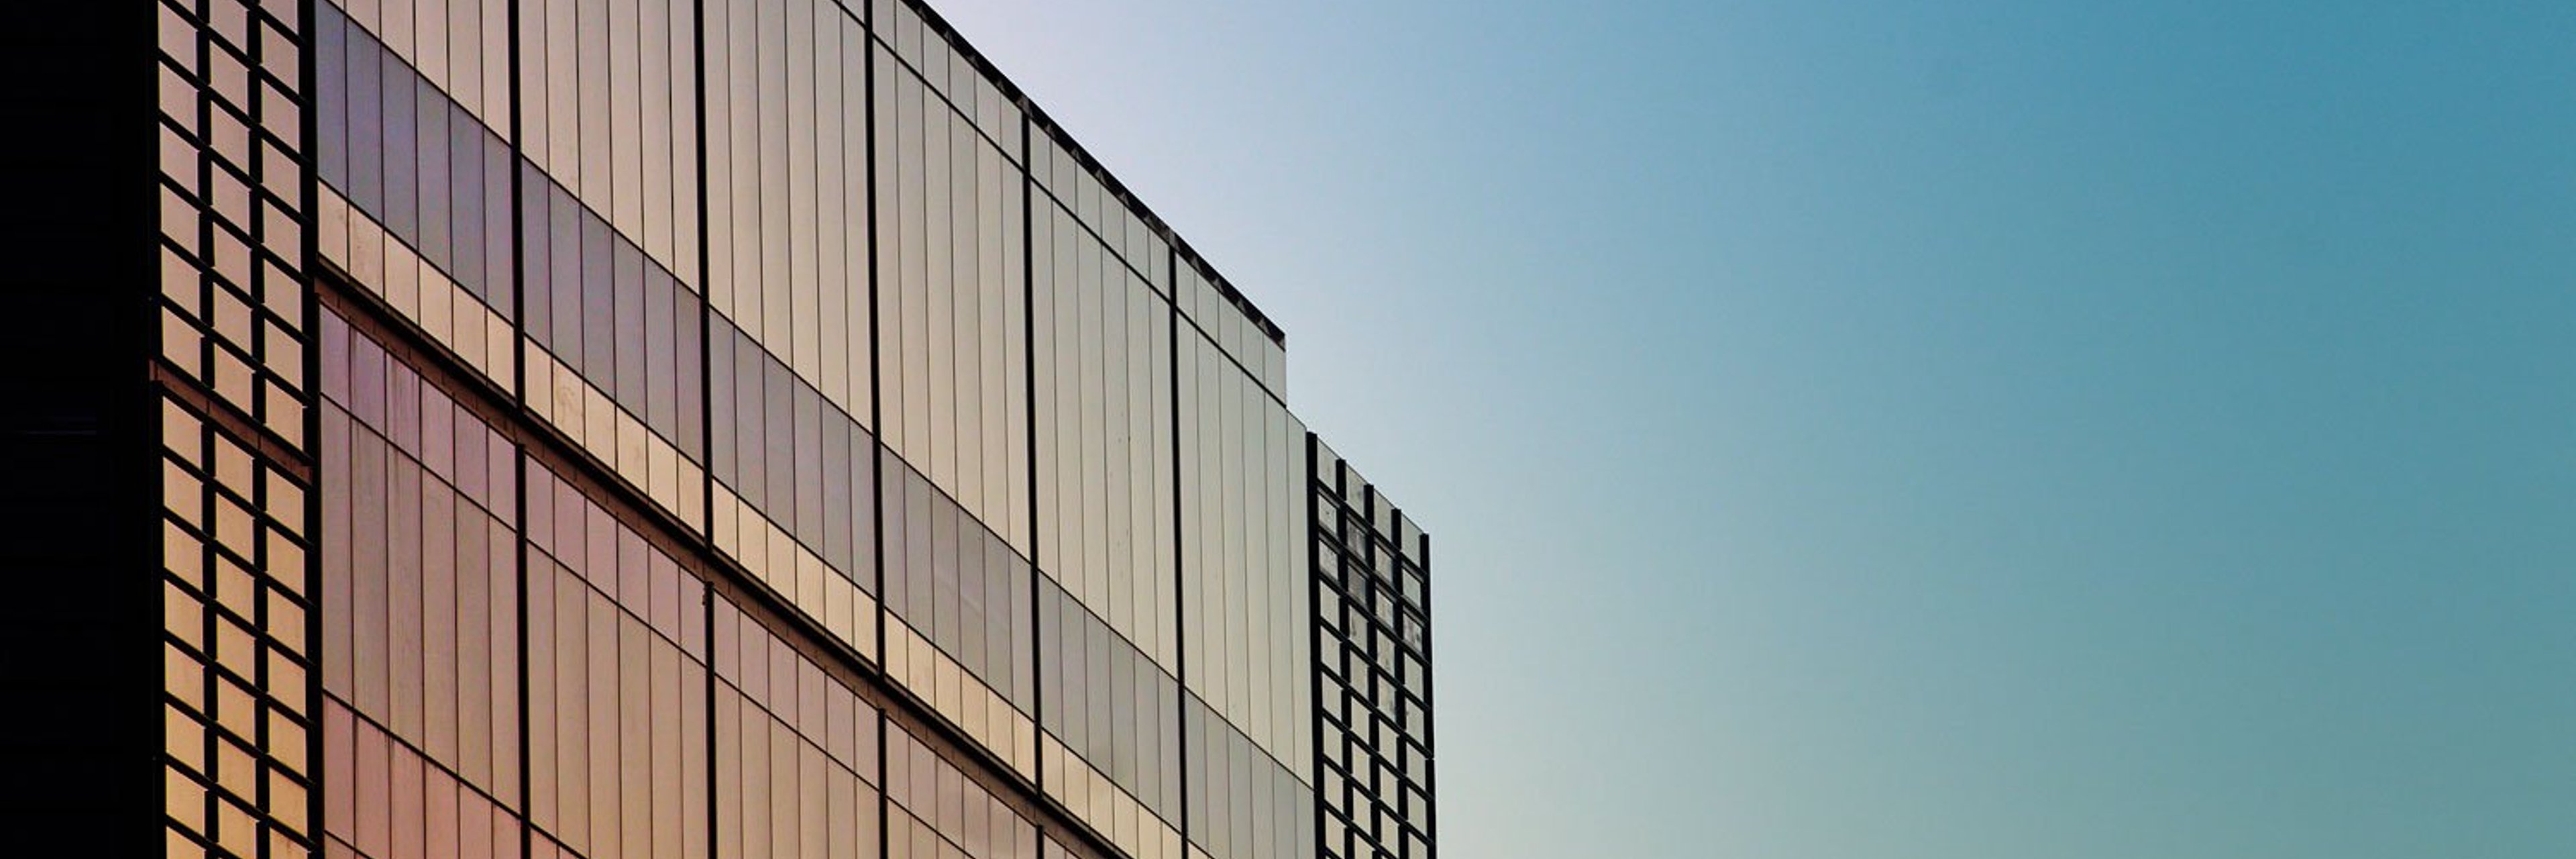 The side of a glass office building at with sunset colours reflecting on the glass against a clear blue sky.